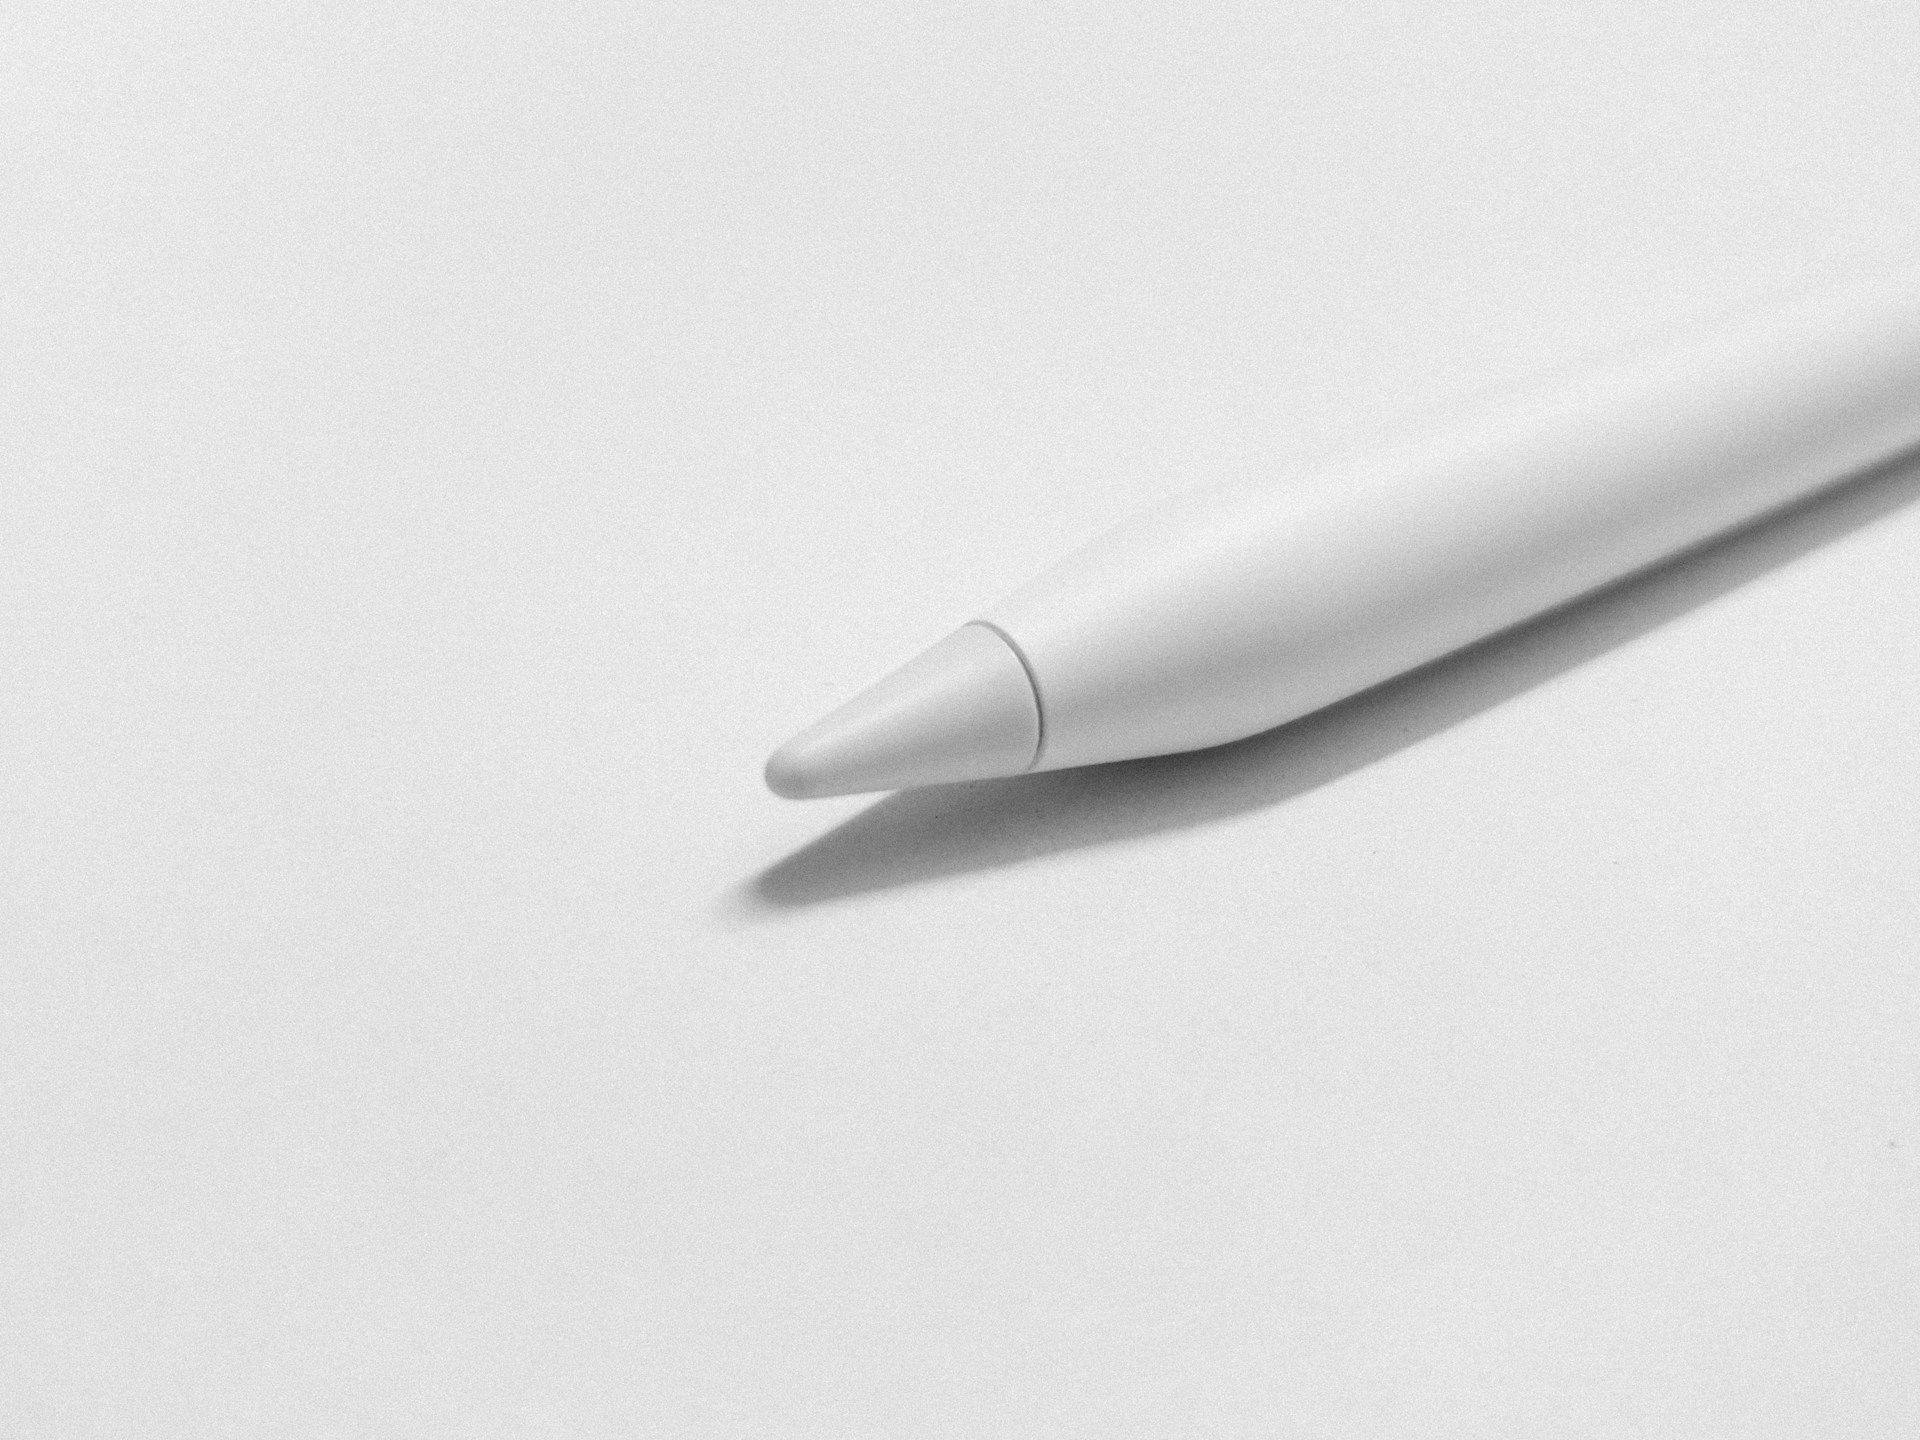 Rumor: Potential Integration of Apple Pencil with Vision Pro